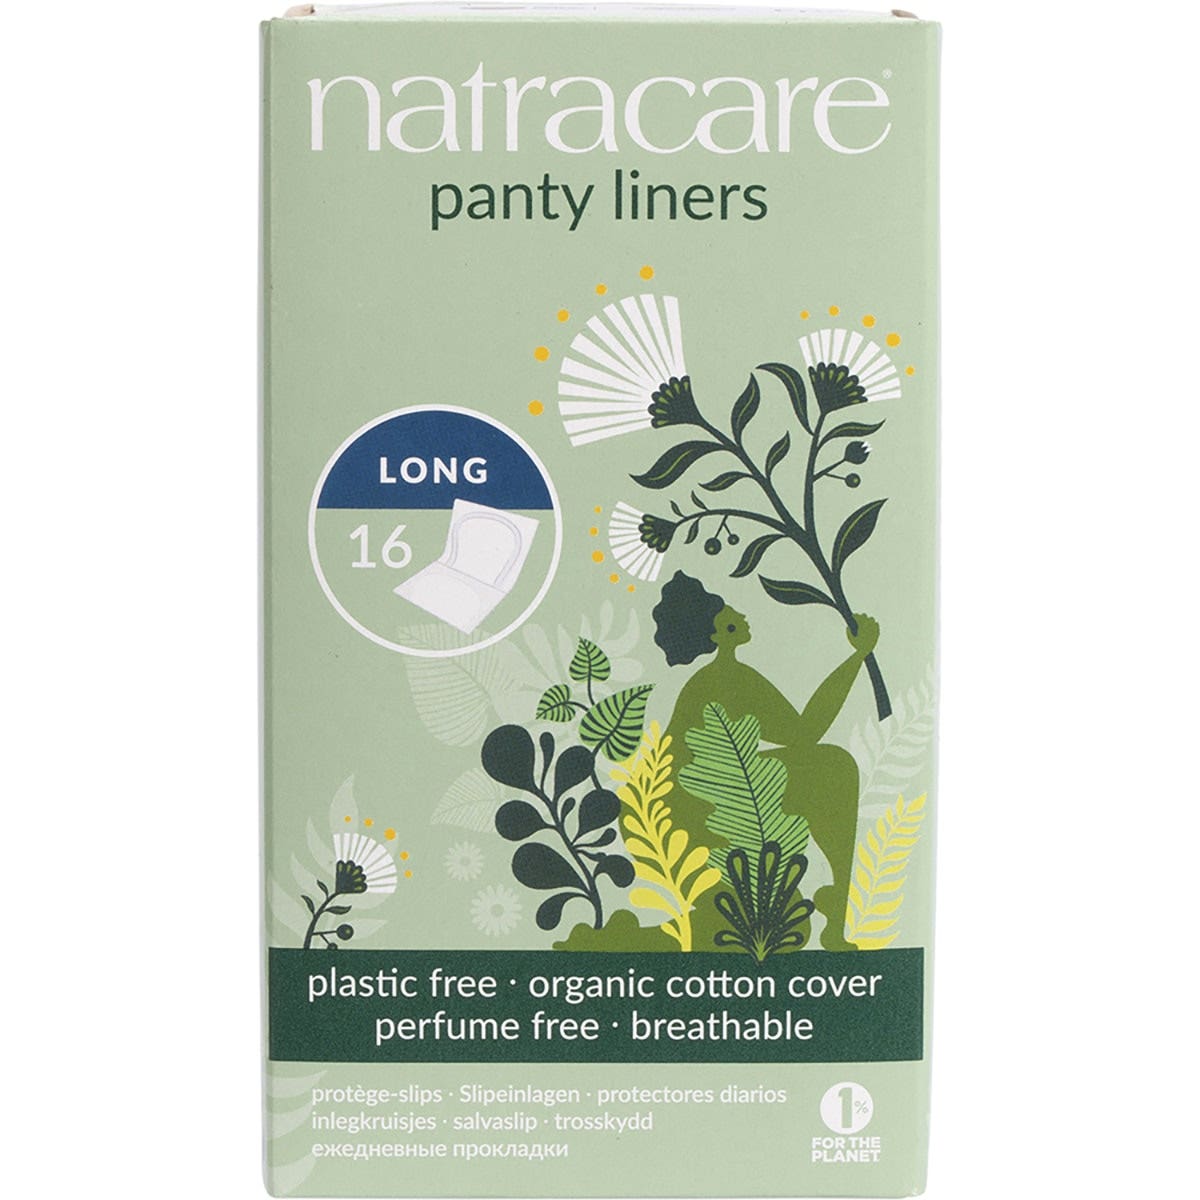 Natracare Panty Liners 16pk, Long {Long Lightly Padded}